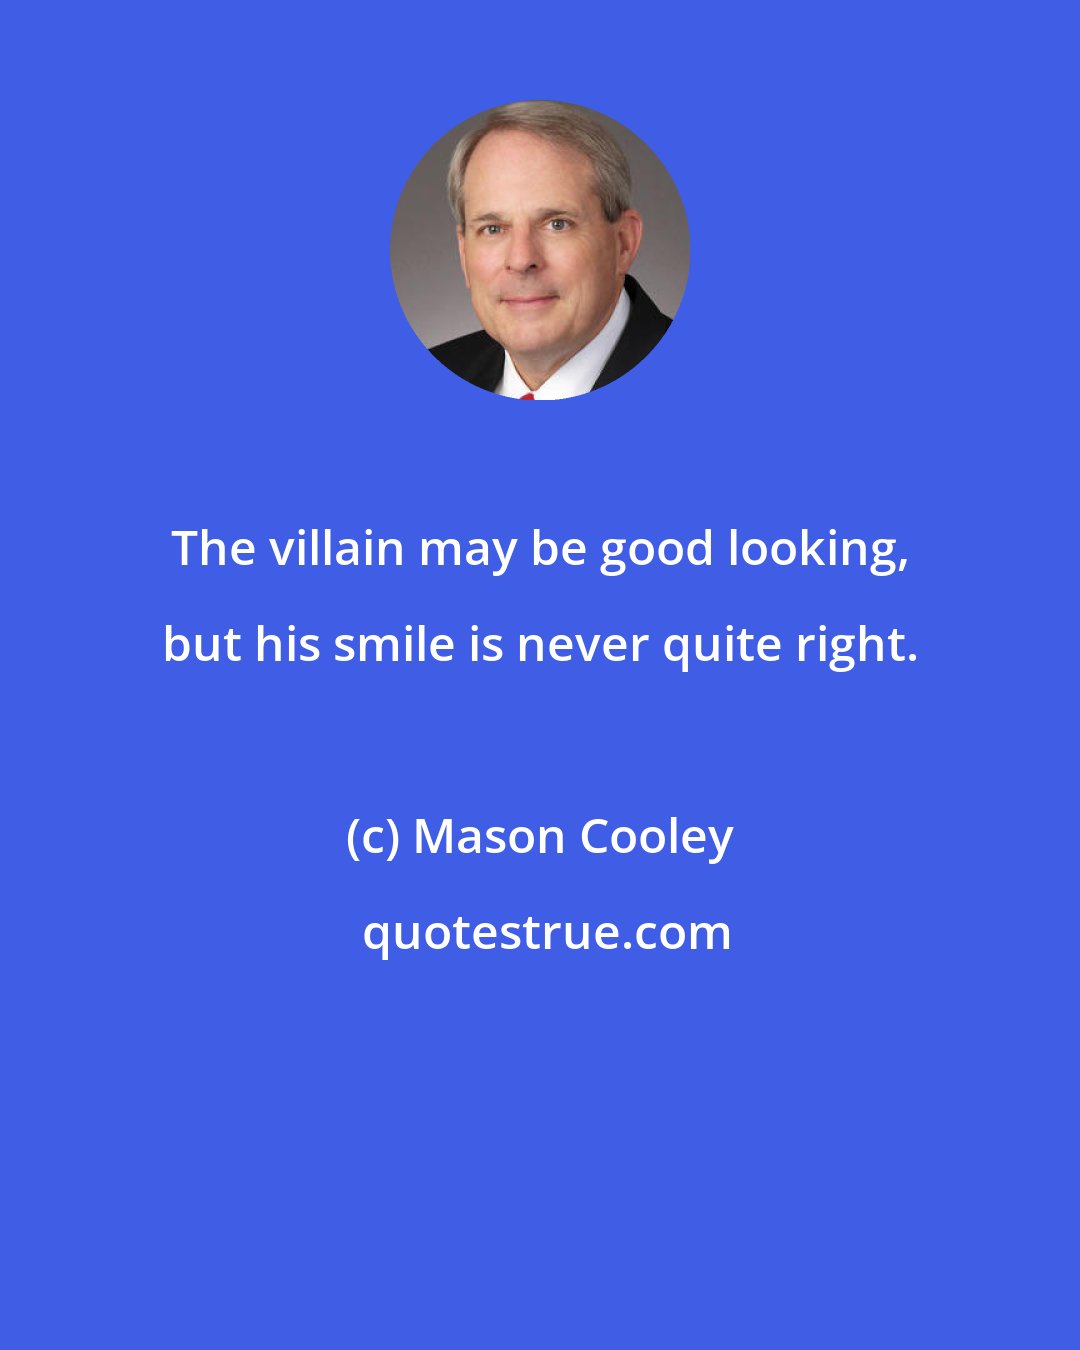 Mason Cooley: The villain may be good looking, but his smile is never quite right.